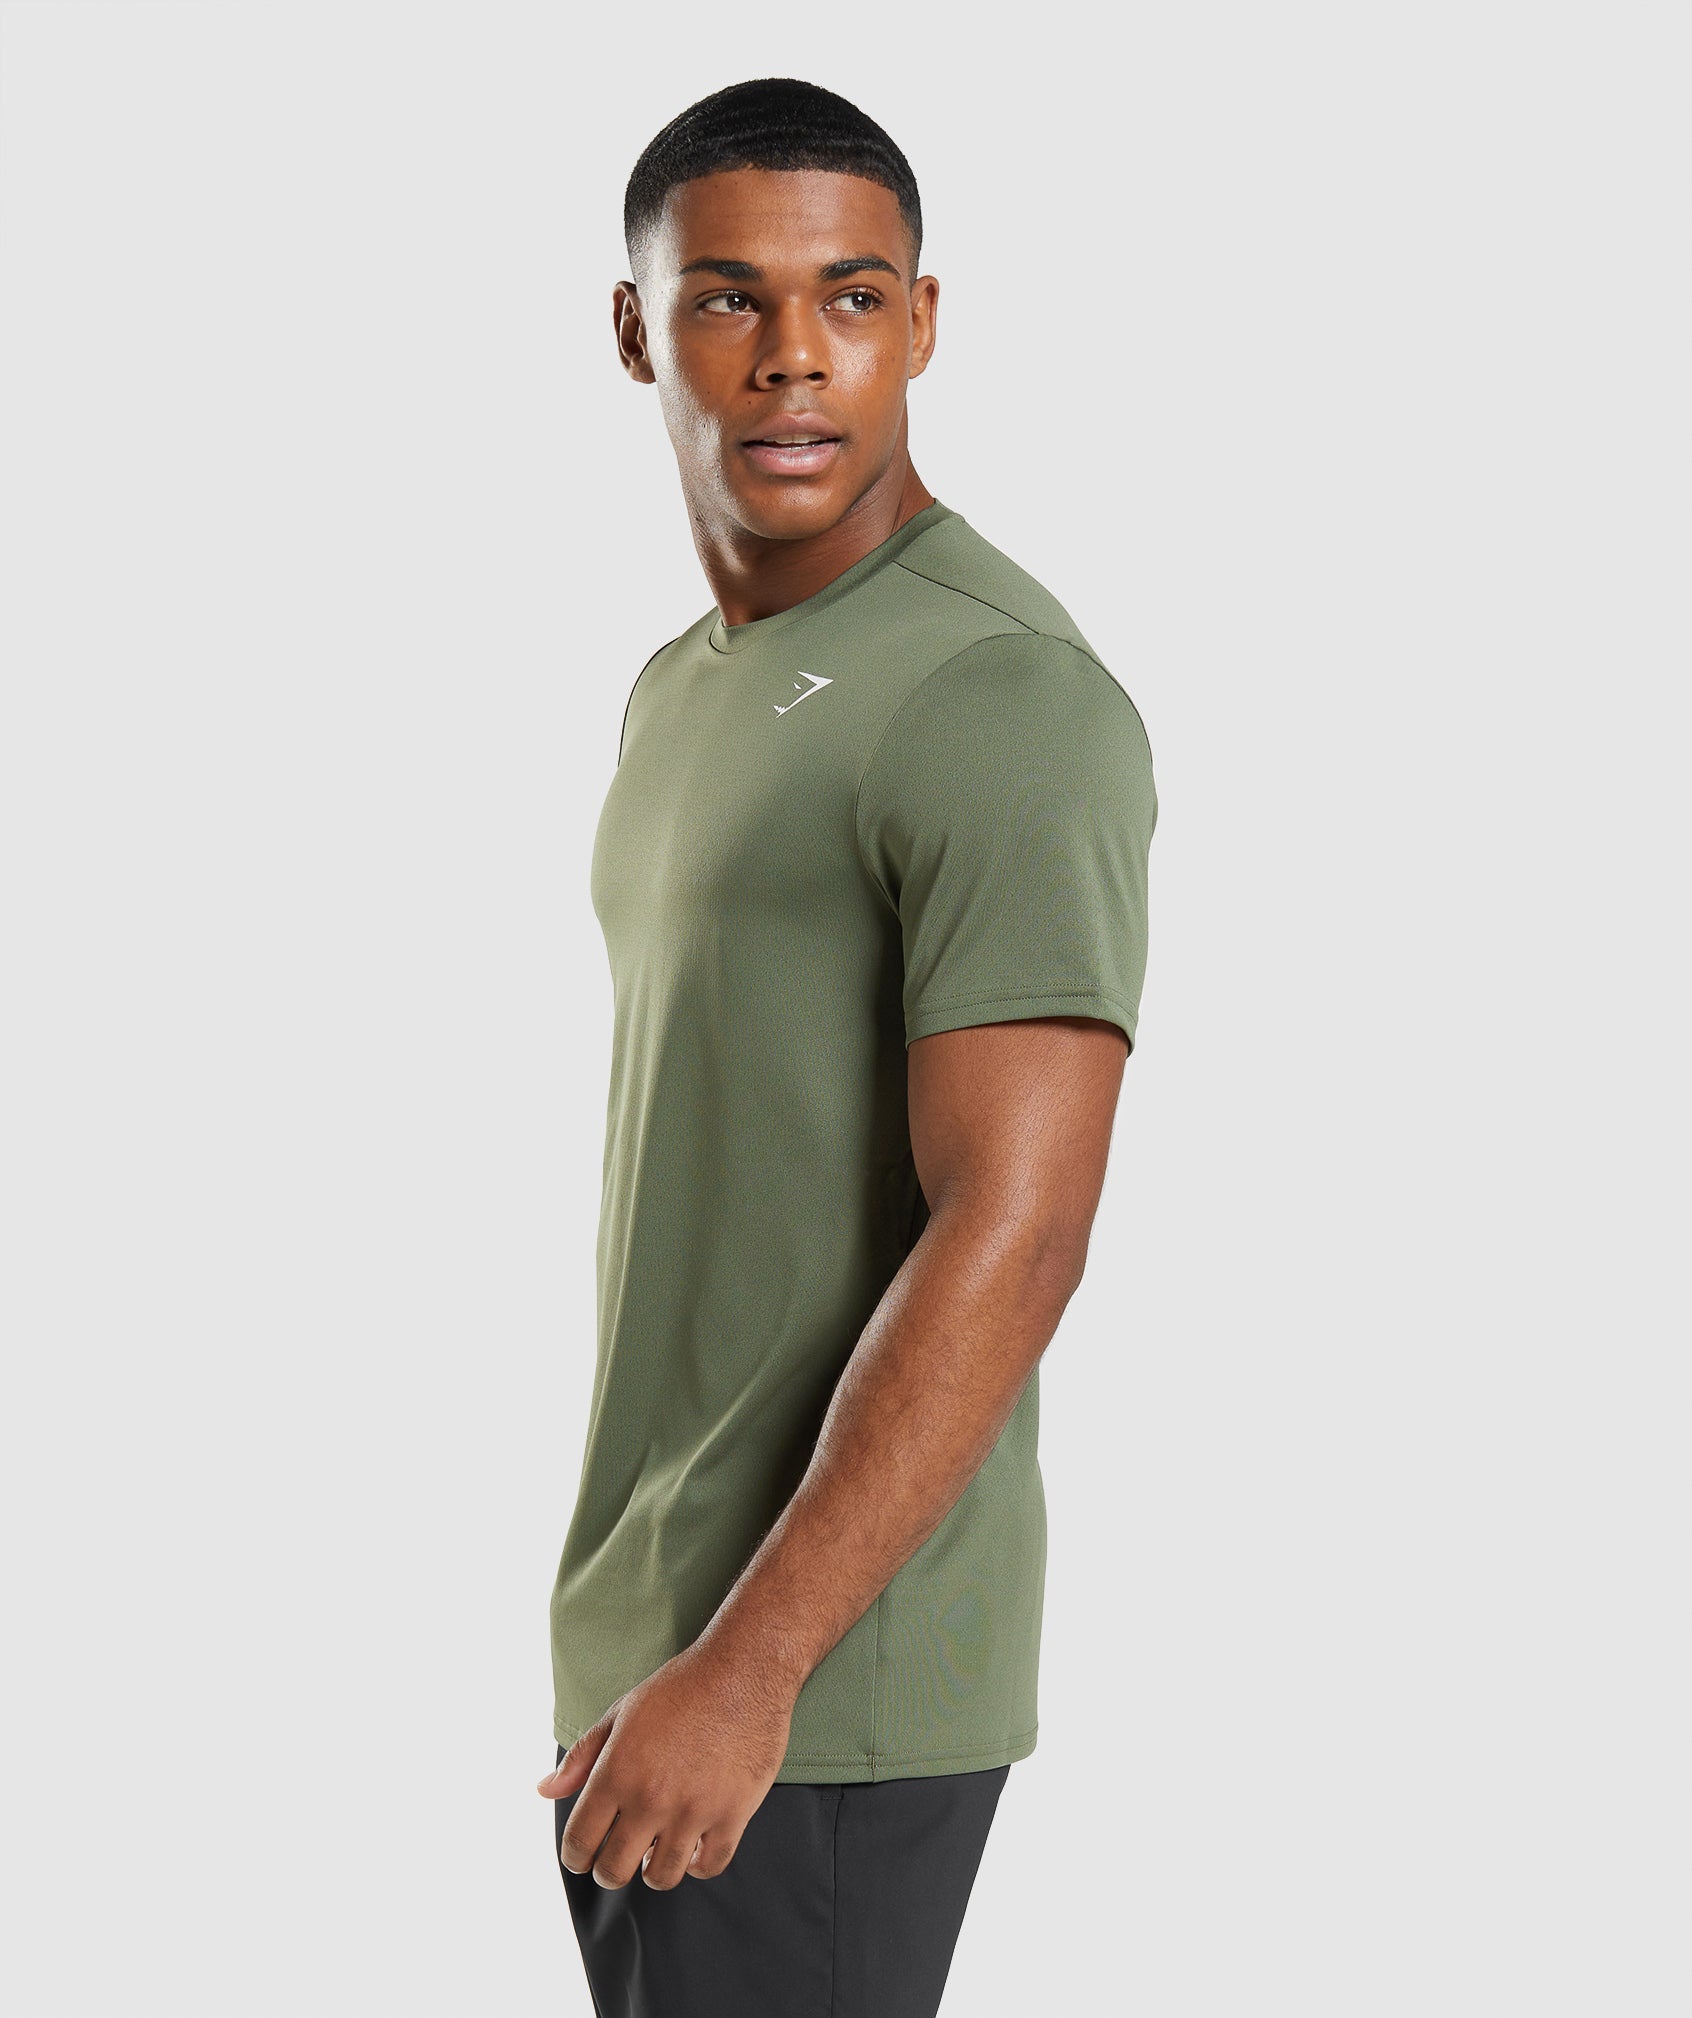 Arrival T-Shirt in Core Olive - view 2